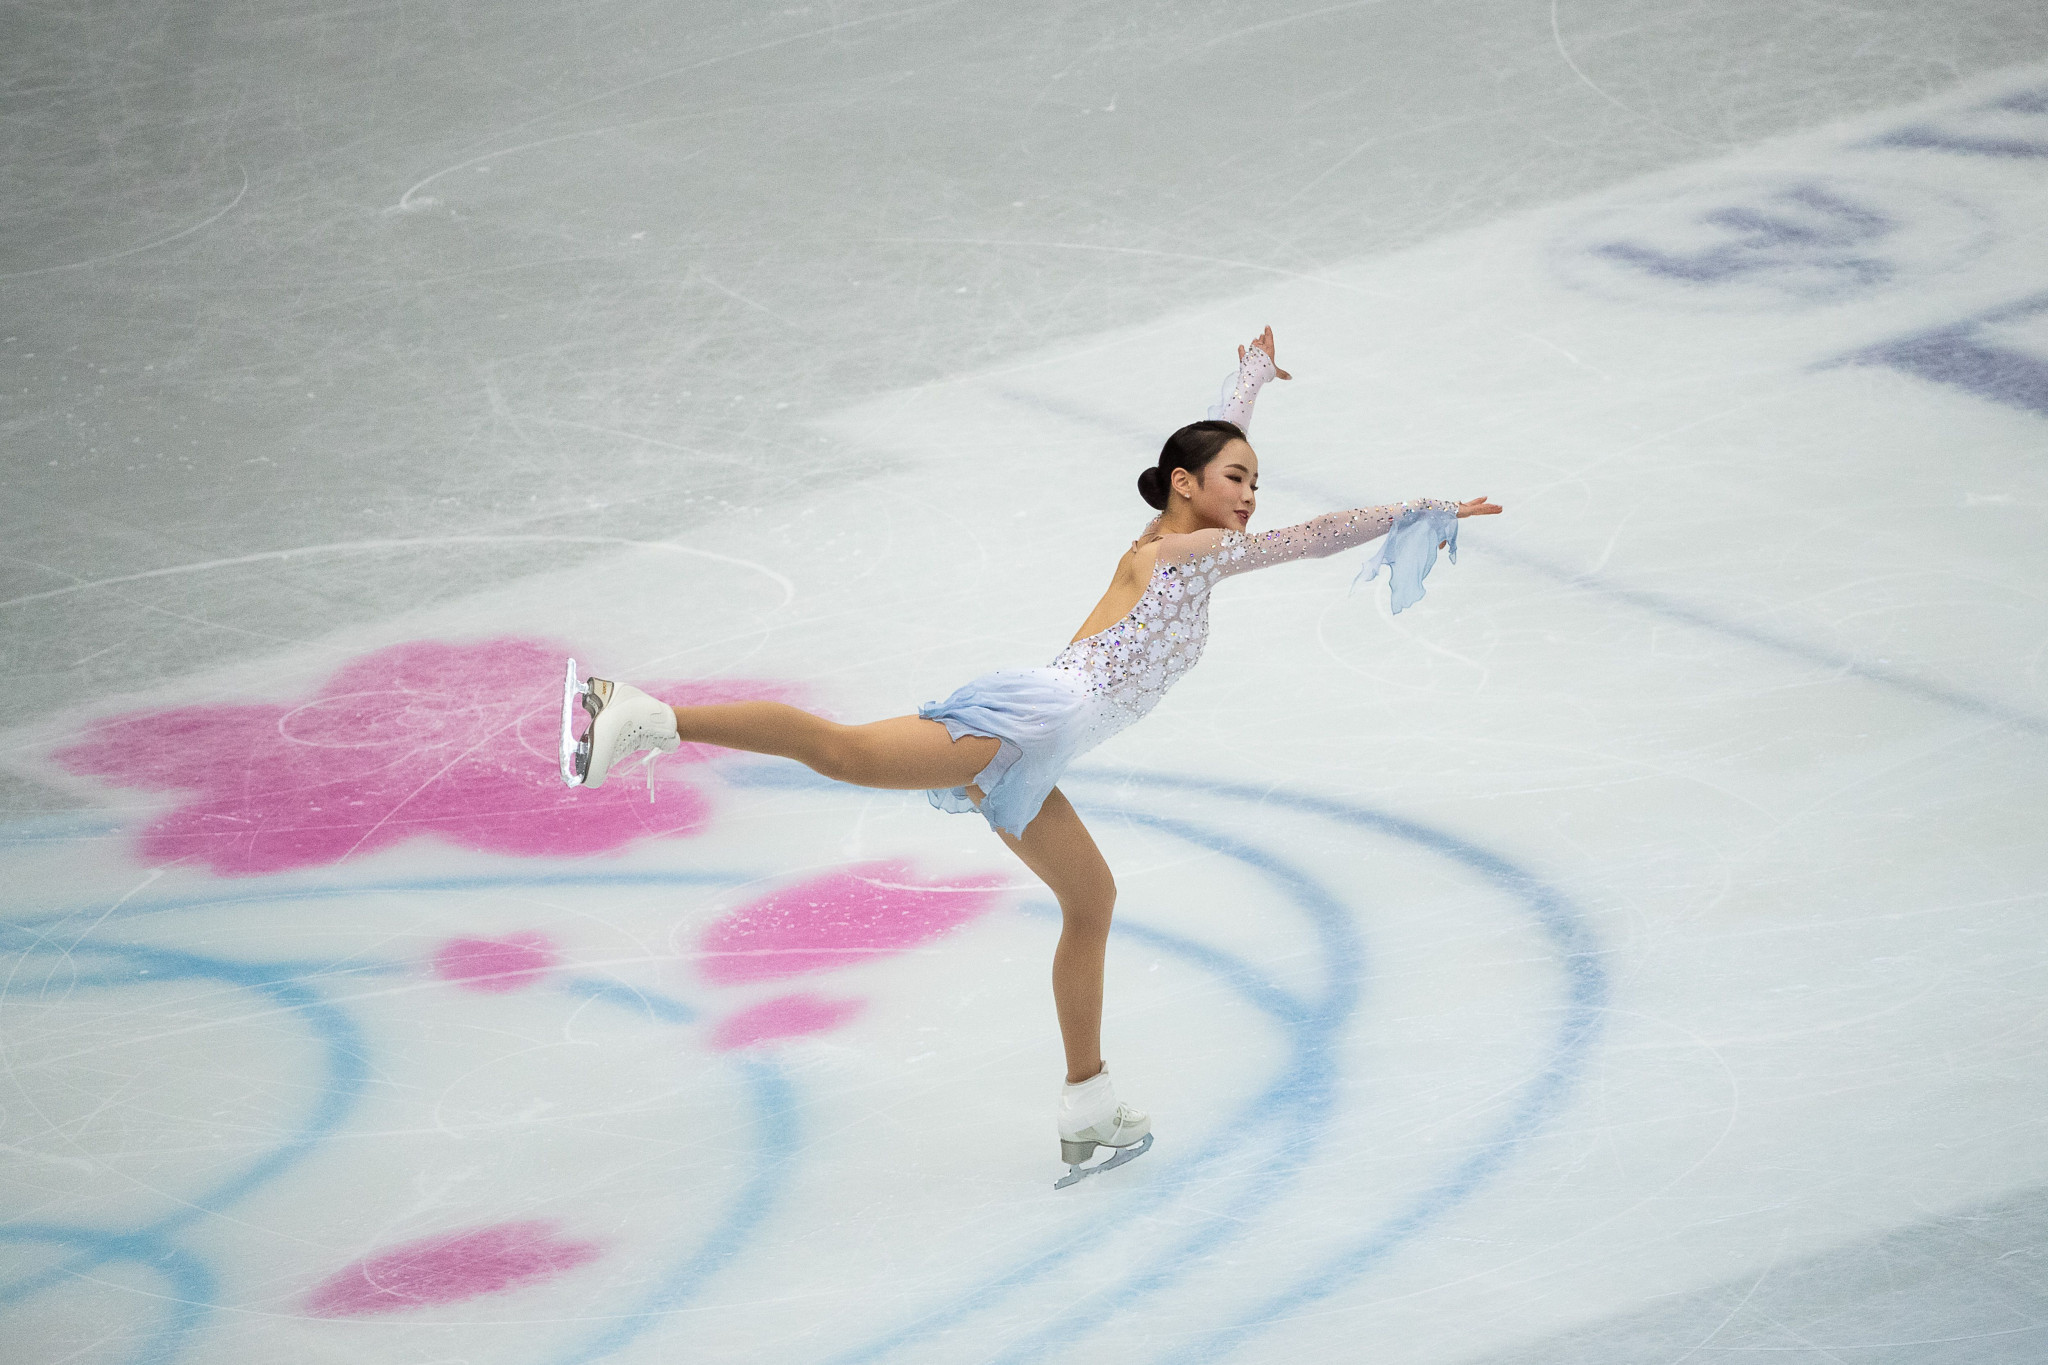 Claims were made that Lim Eun-soo was deliberately injured ©Getty Images